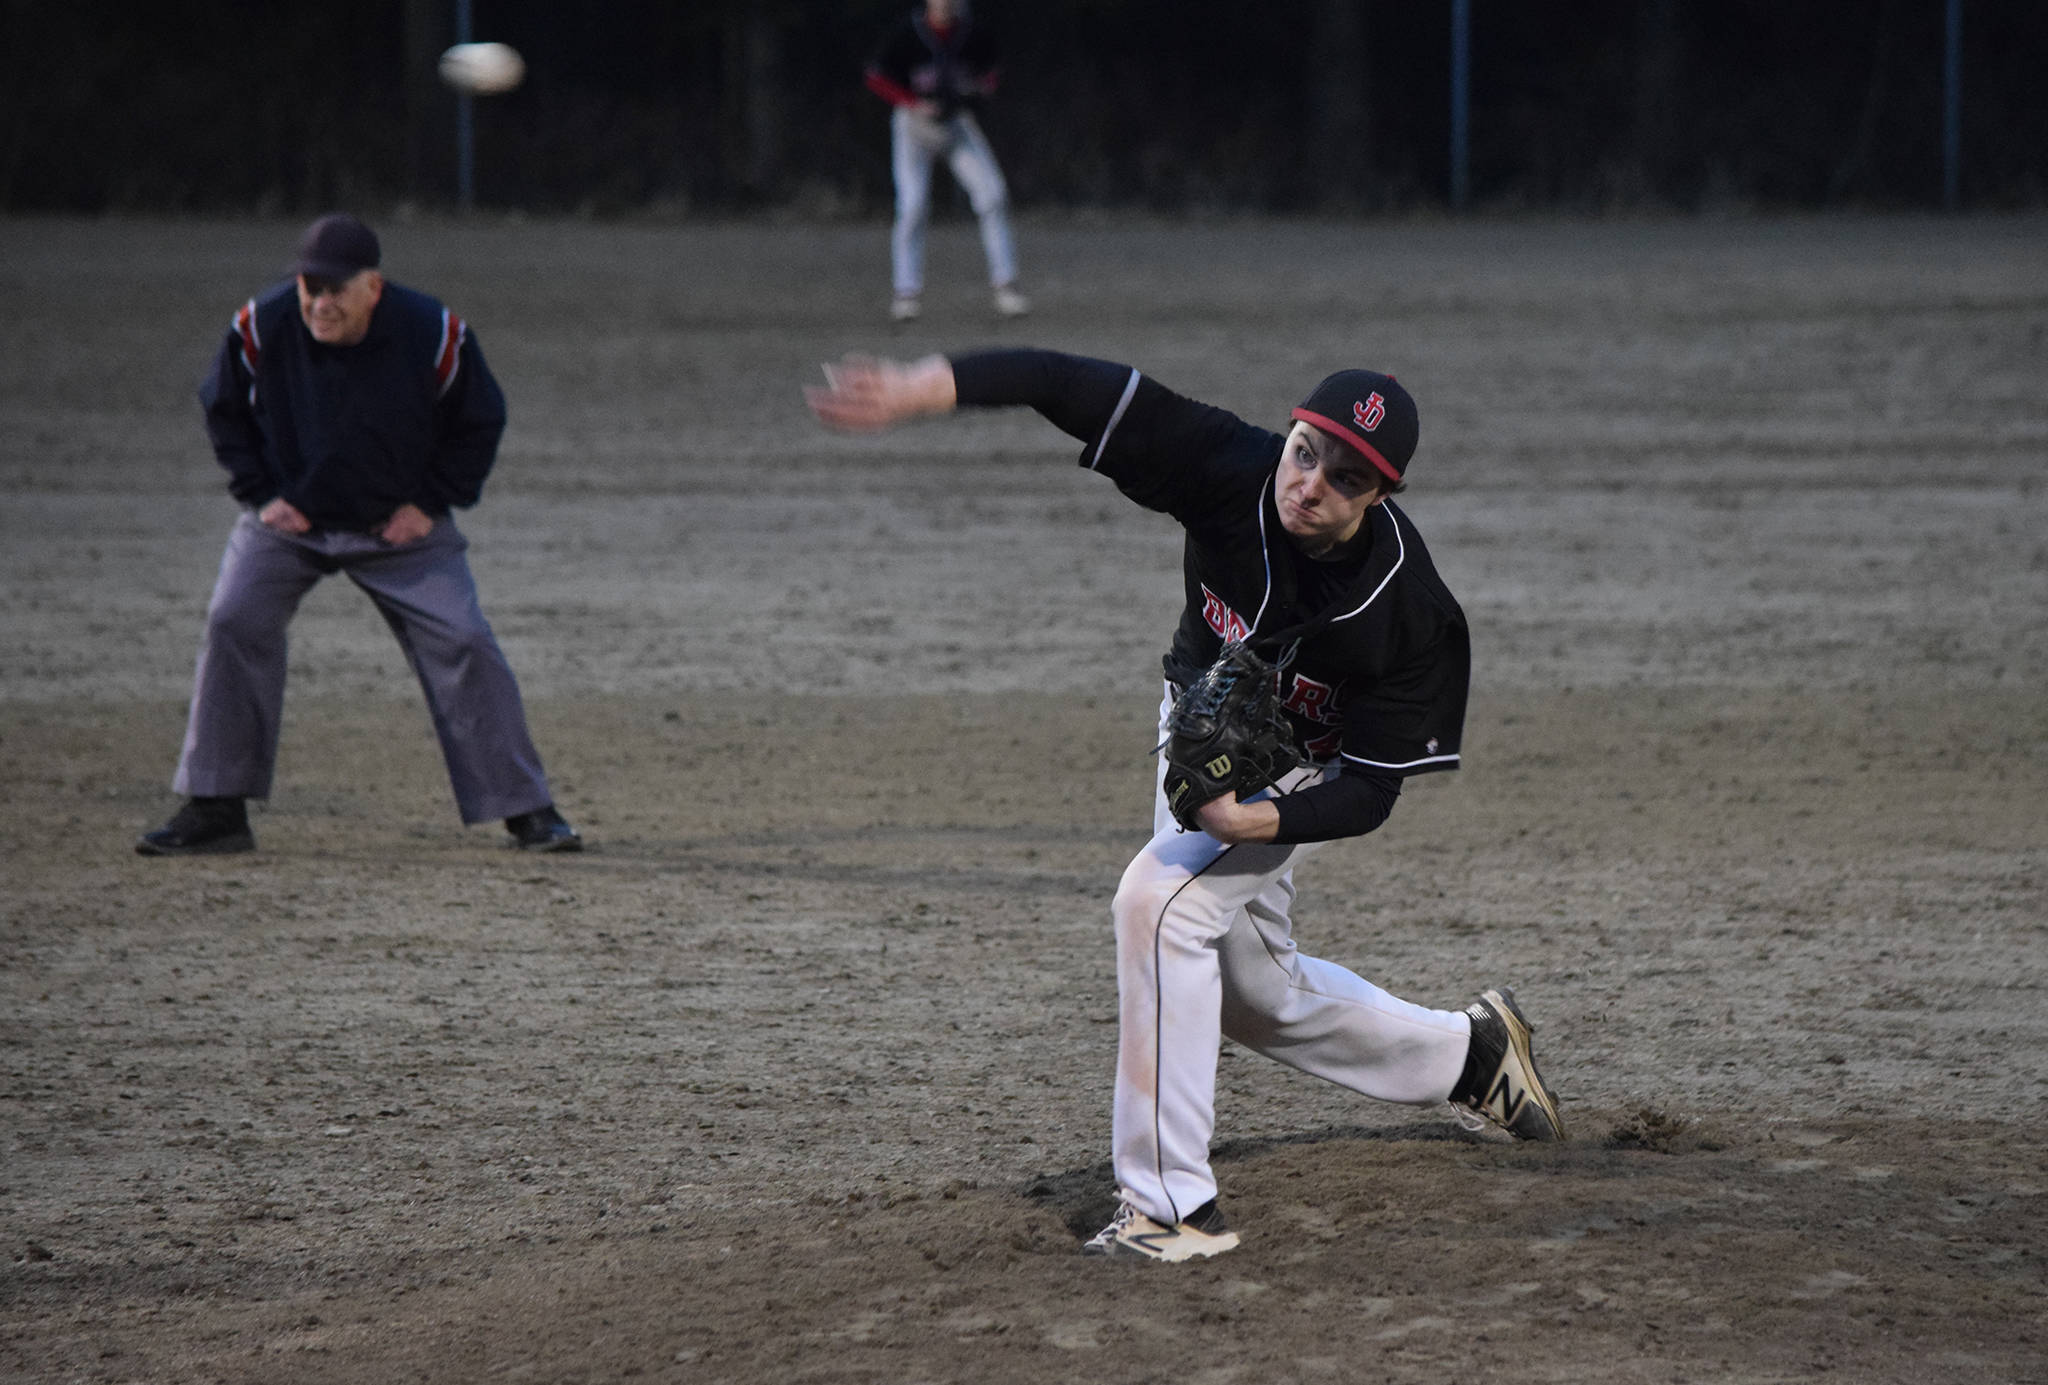 Juneau-Douglas High School’s Brock McCormick pitches against Thunder Mountain in a Southeast Conference game at Adair-Kennedy Memorial Park on Saturday, April 20, 2019. JDHS split a double header against TMHS. (Nolin Ainsworth | Juneau Empire)